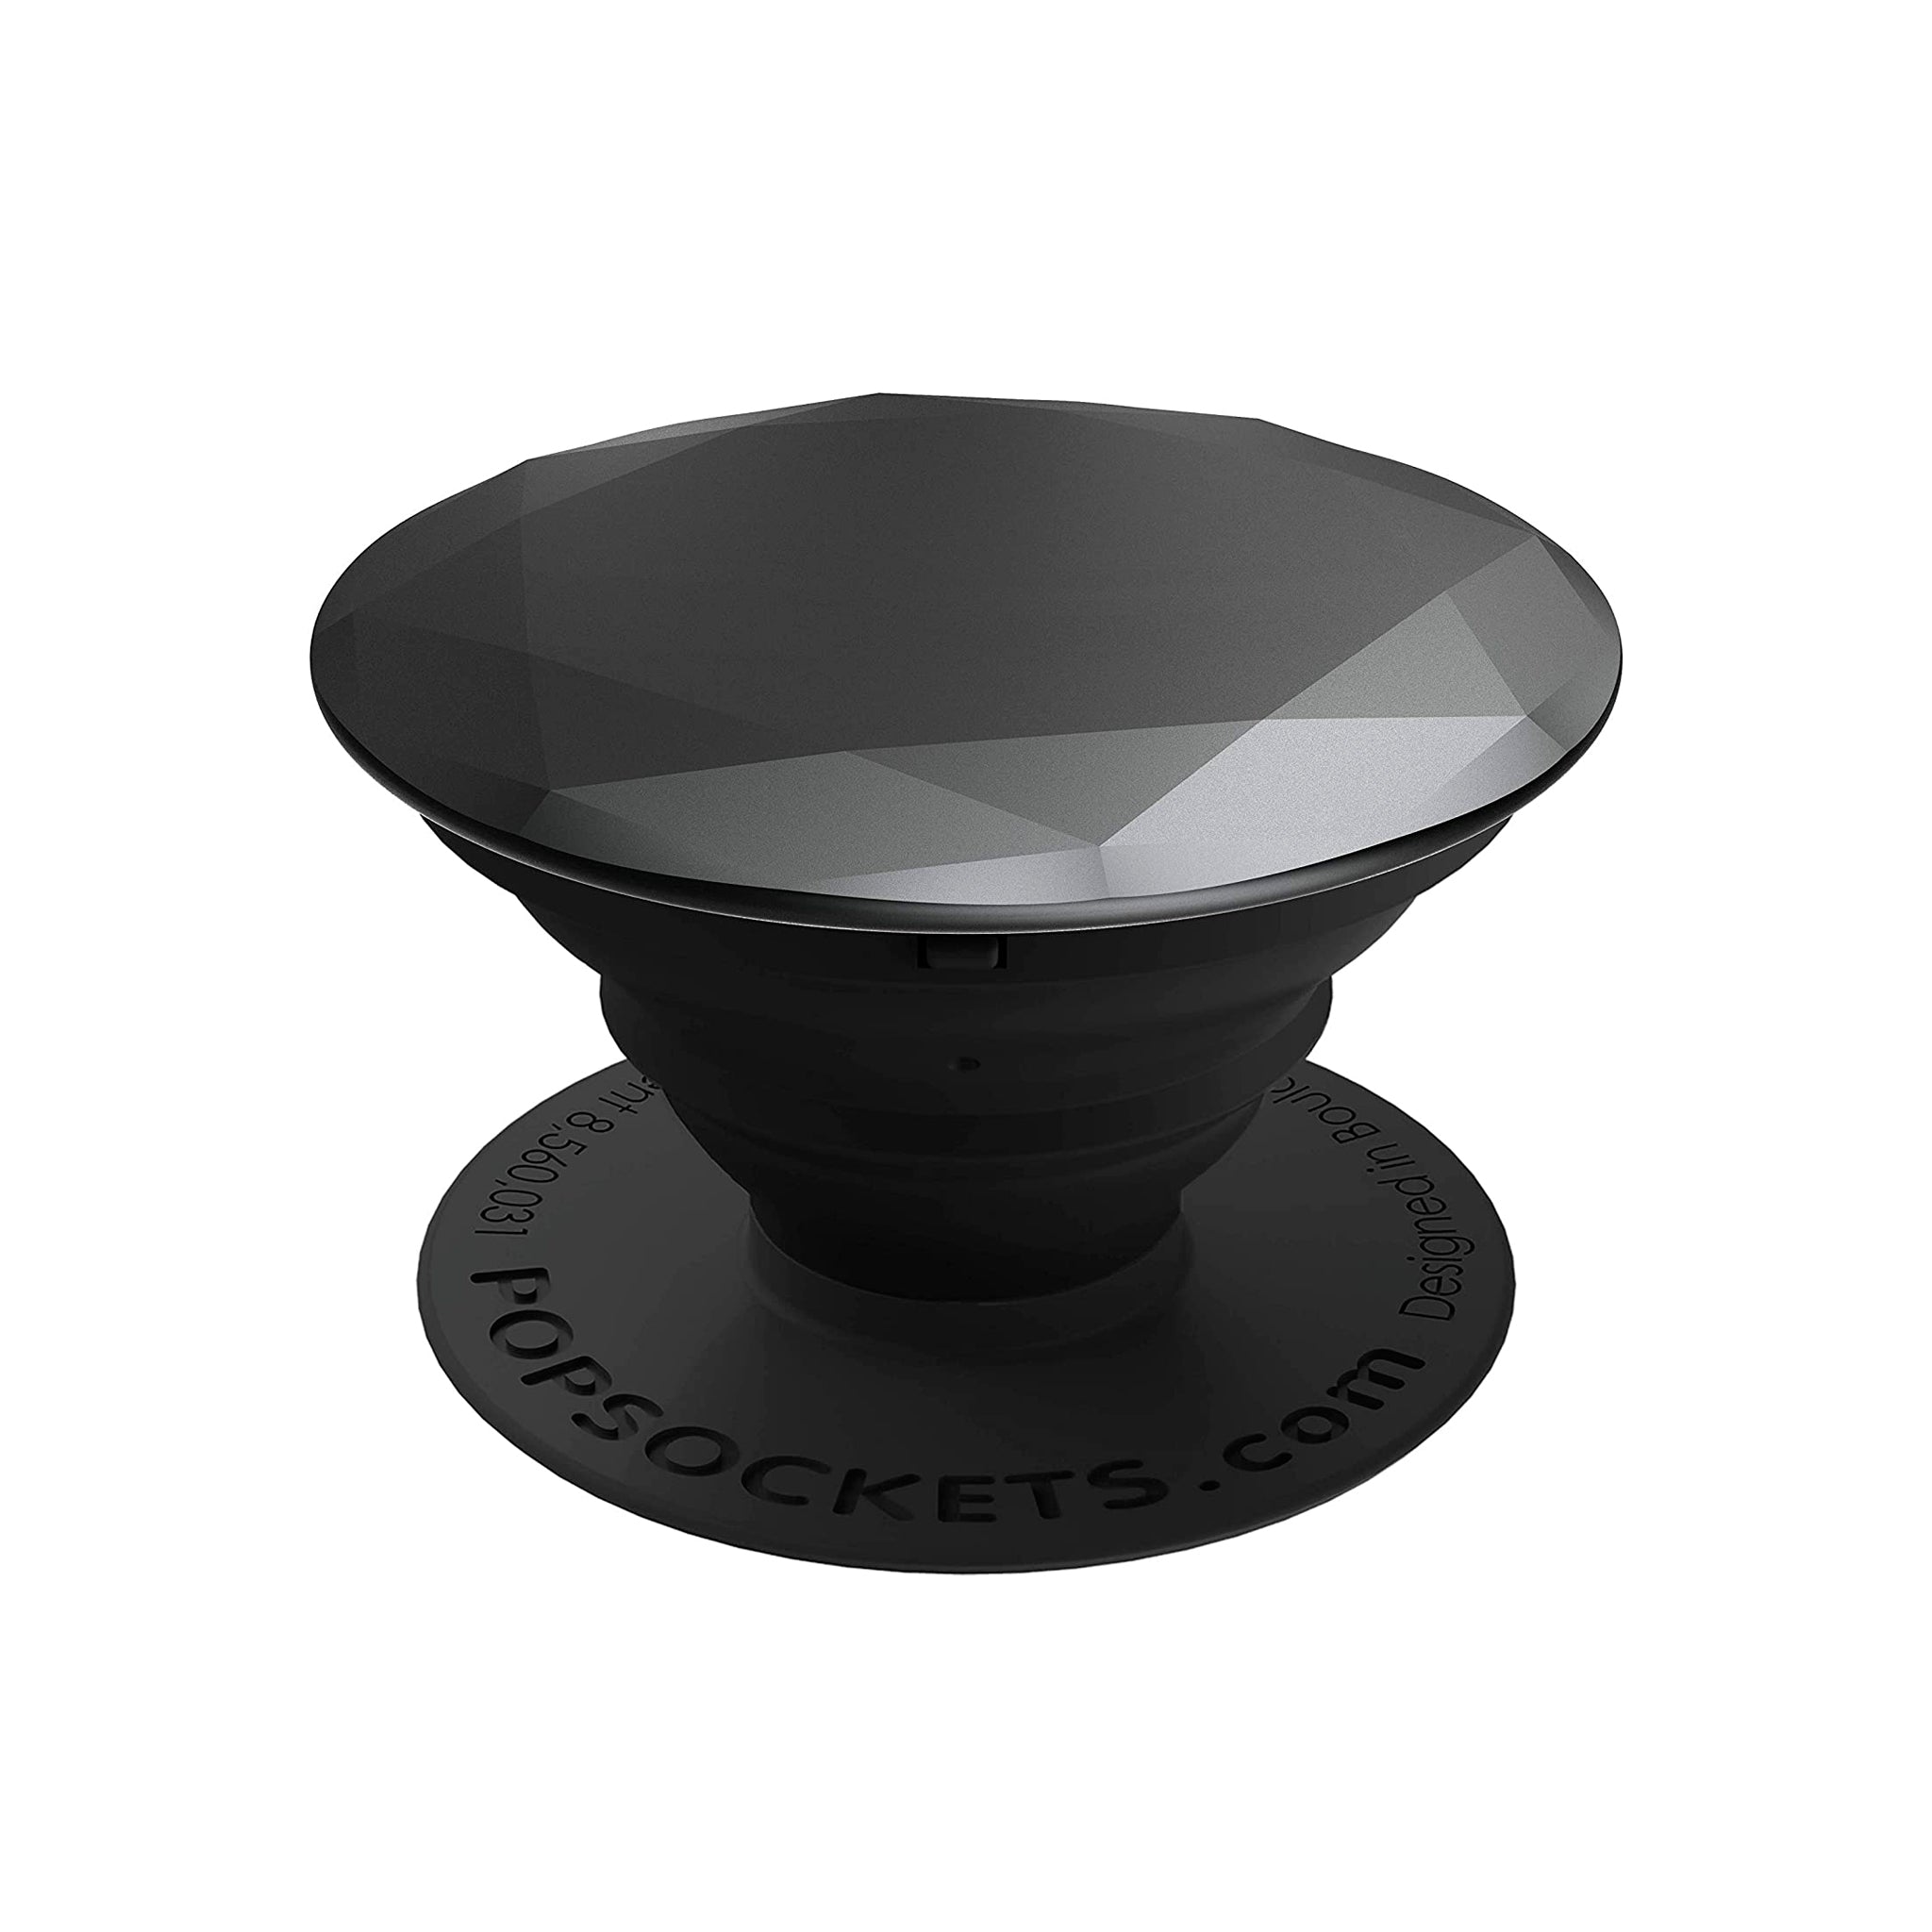 Popsockets - Popgrip Premium Metallic Diamond Swappable Device Stand And Grip -  Black